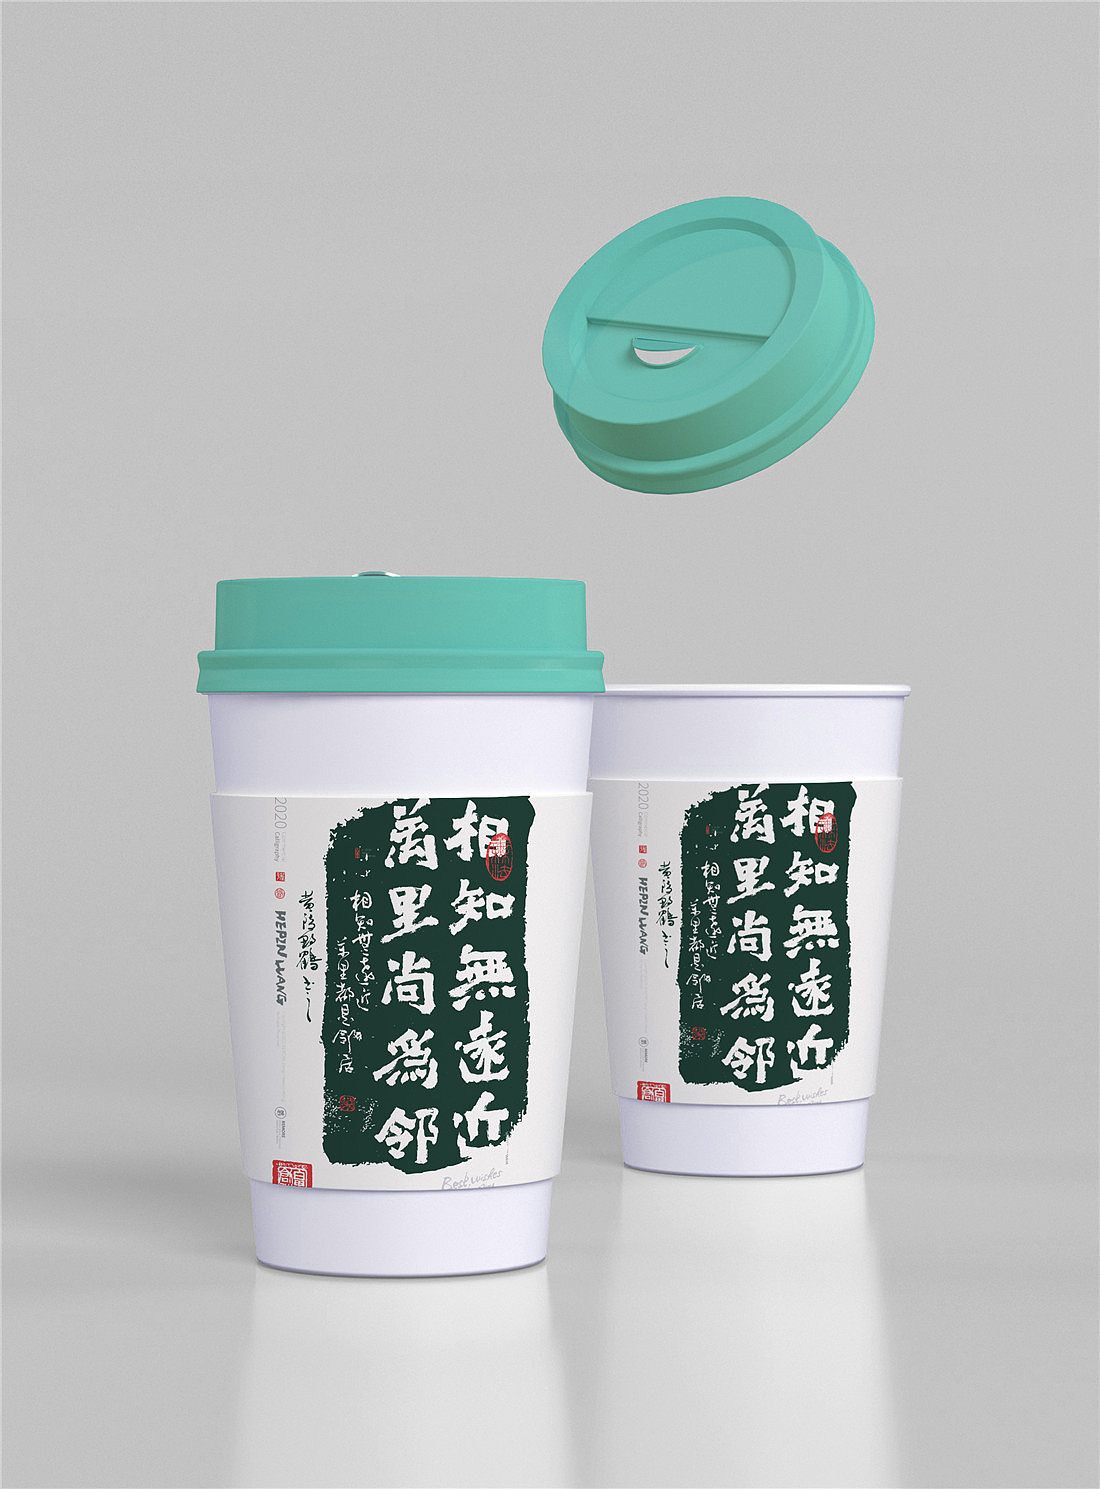 Chinese Creative Font Design-Fonts on packaging with Chinese flavor and personality